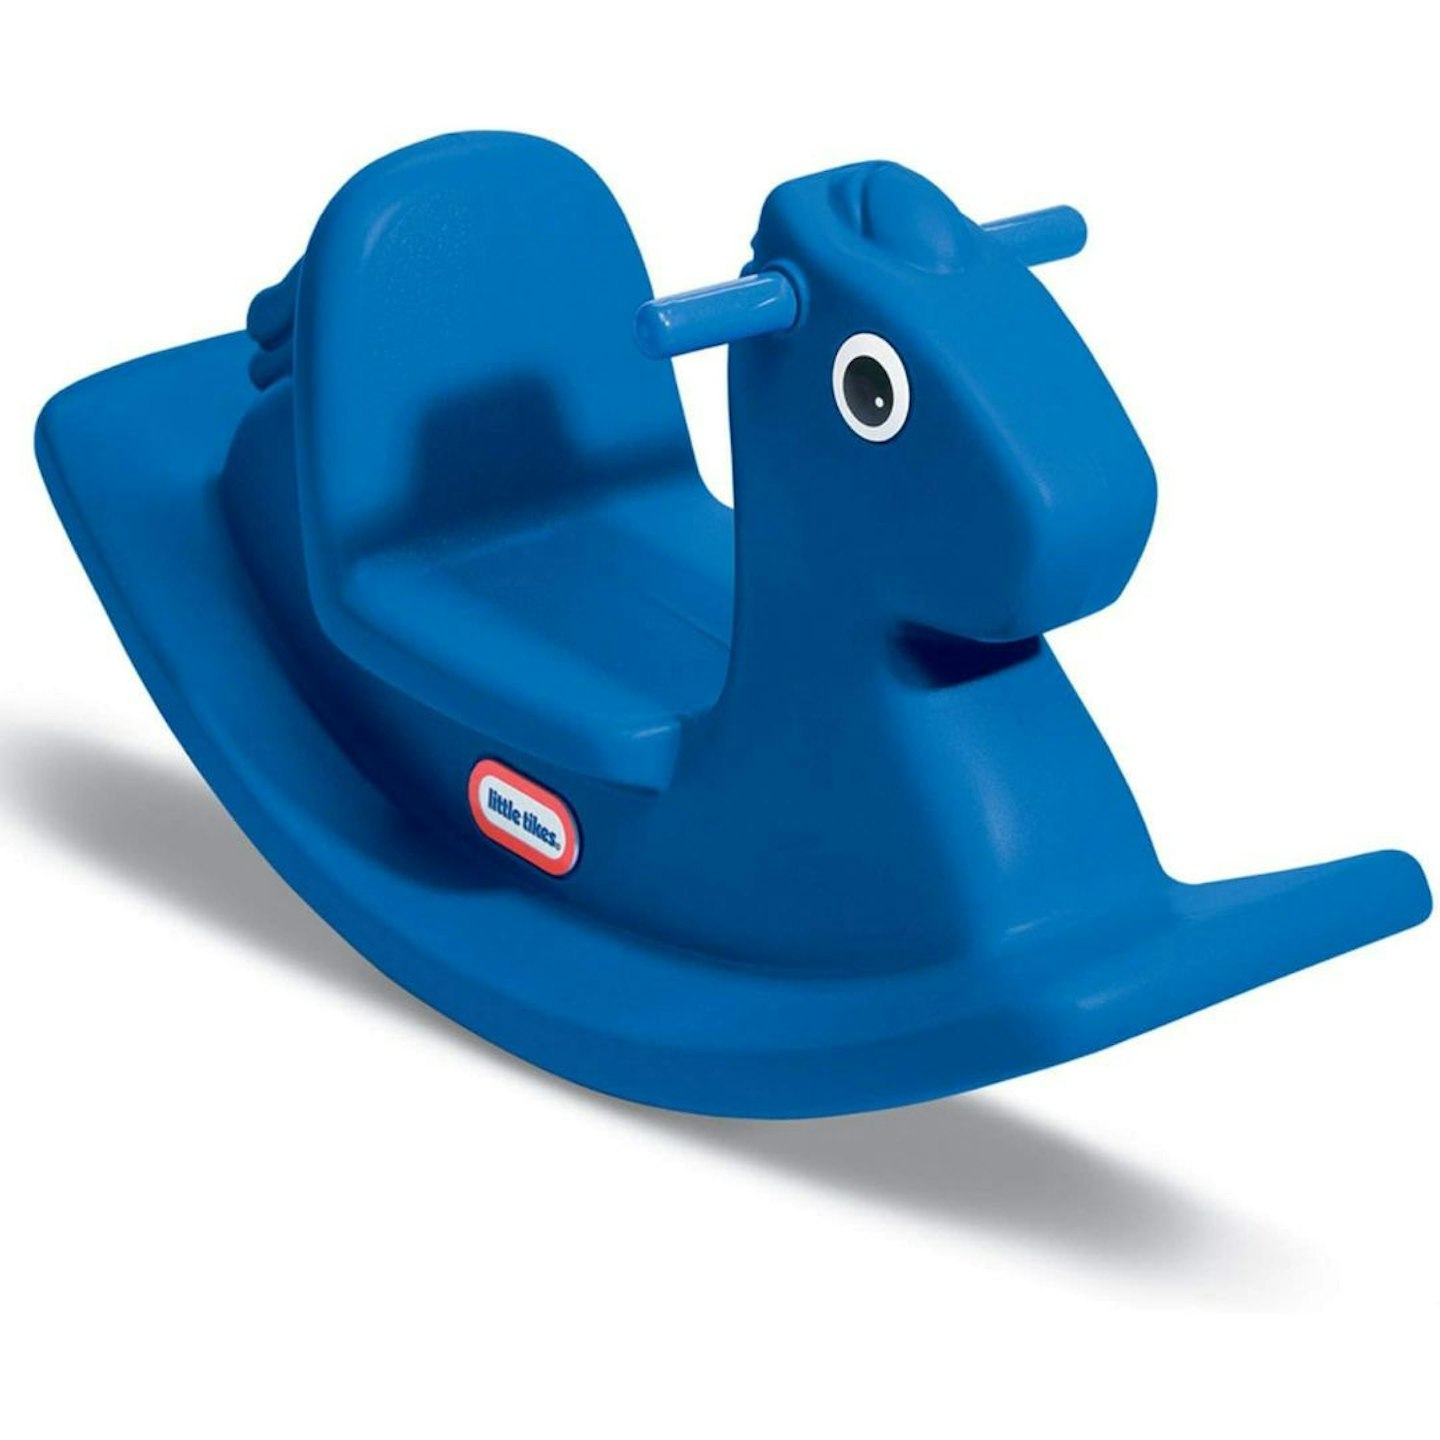 The Best Toys For One-Year-Olds: Little Tikes 620171 Rocking Horse